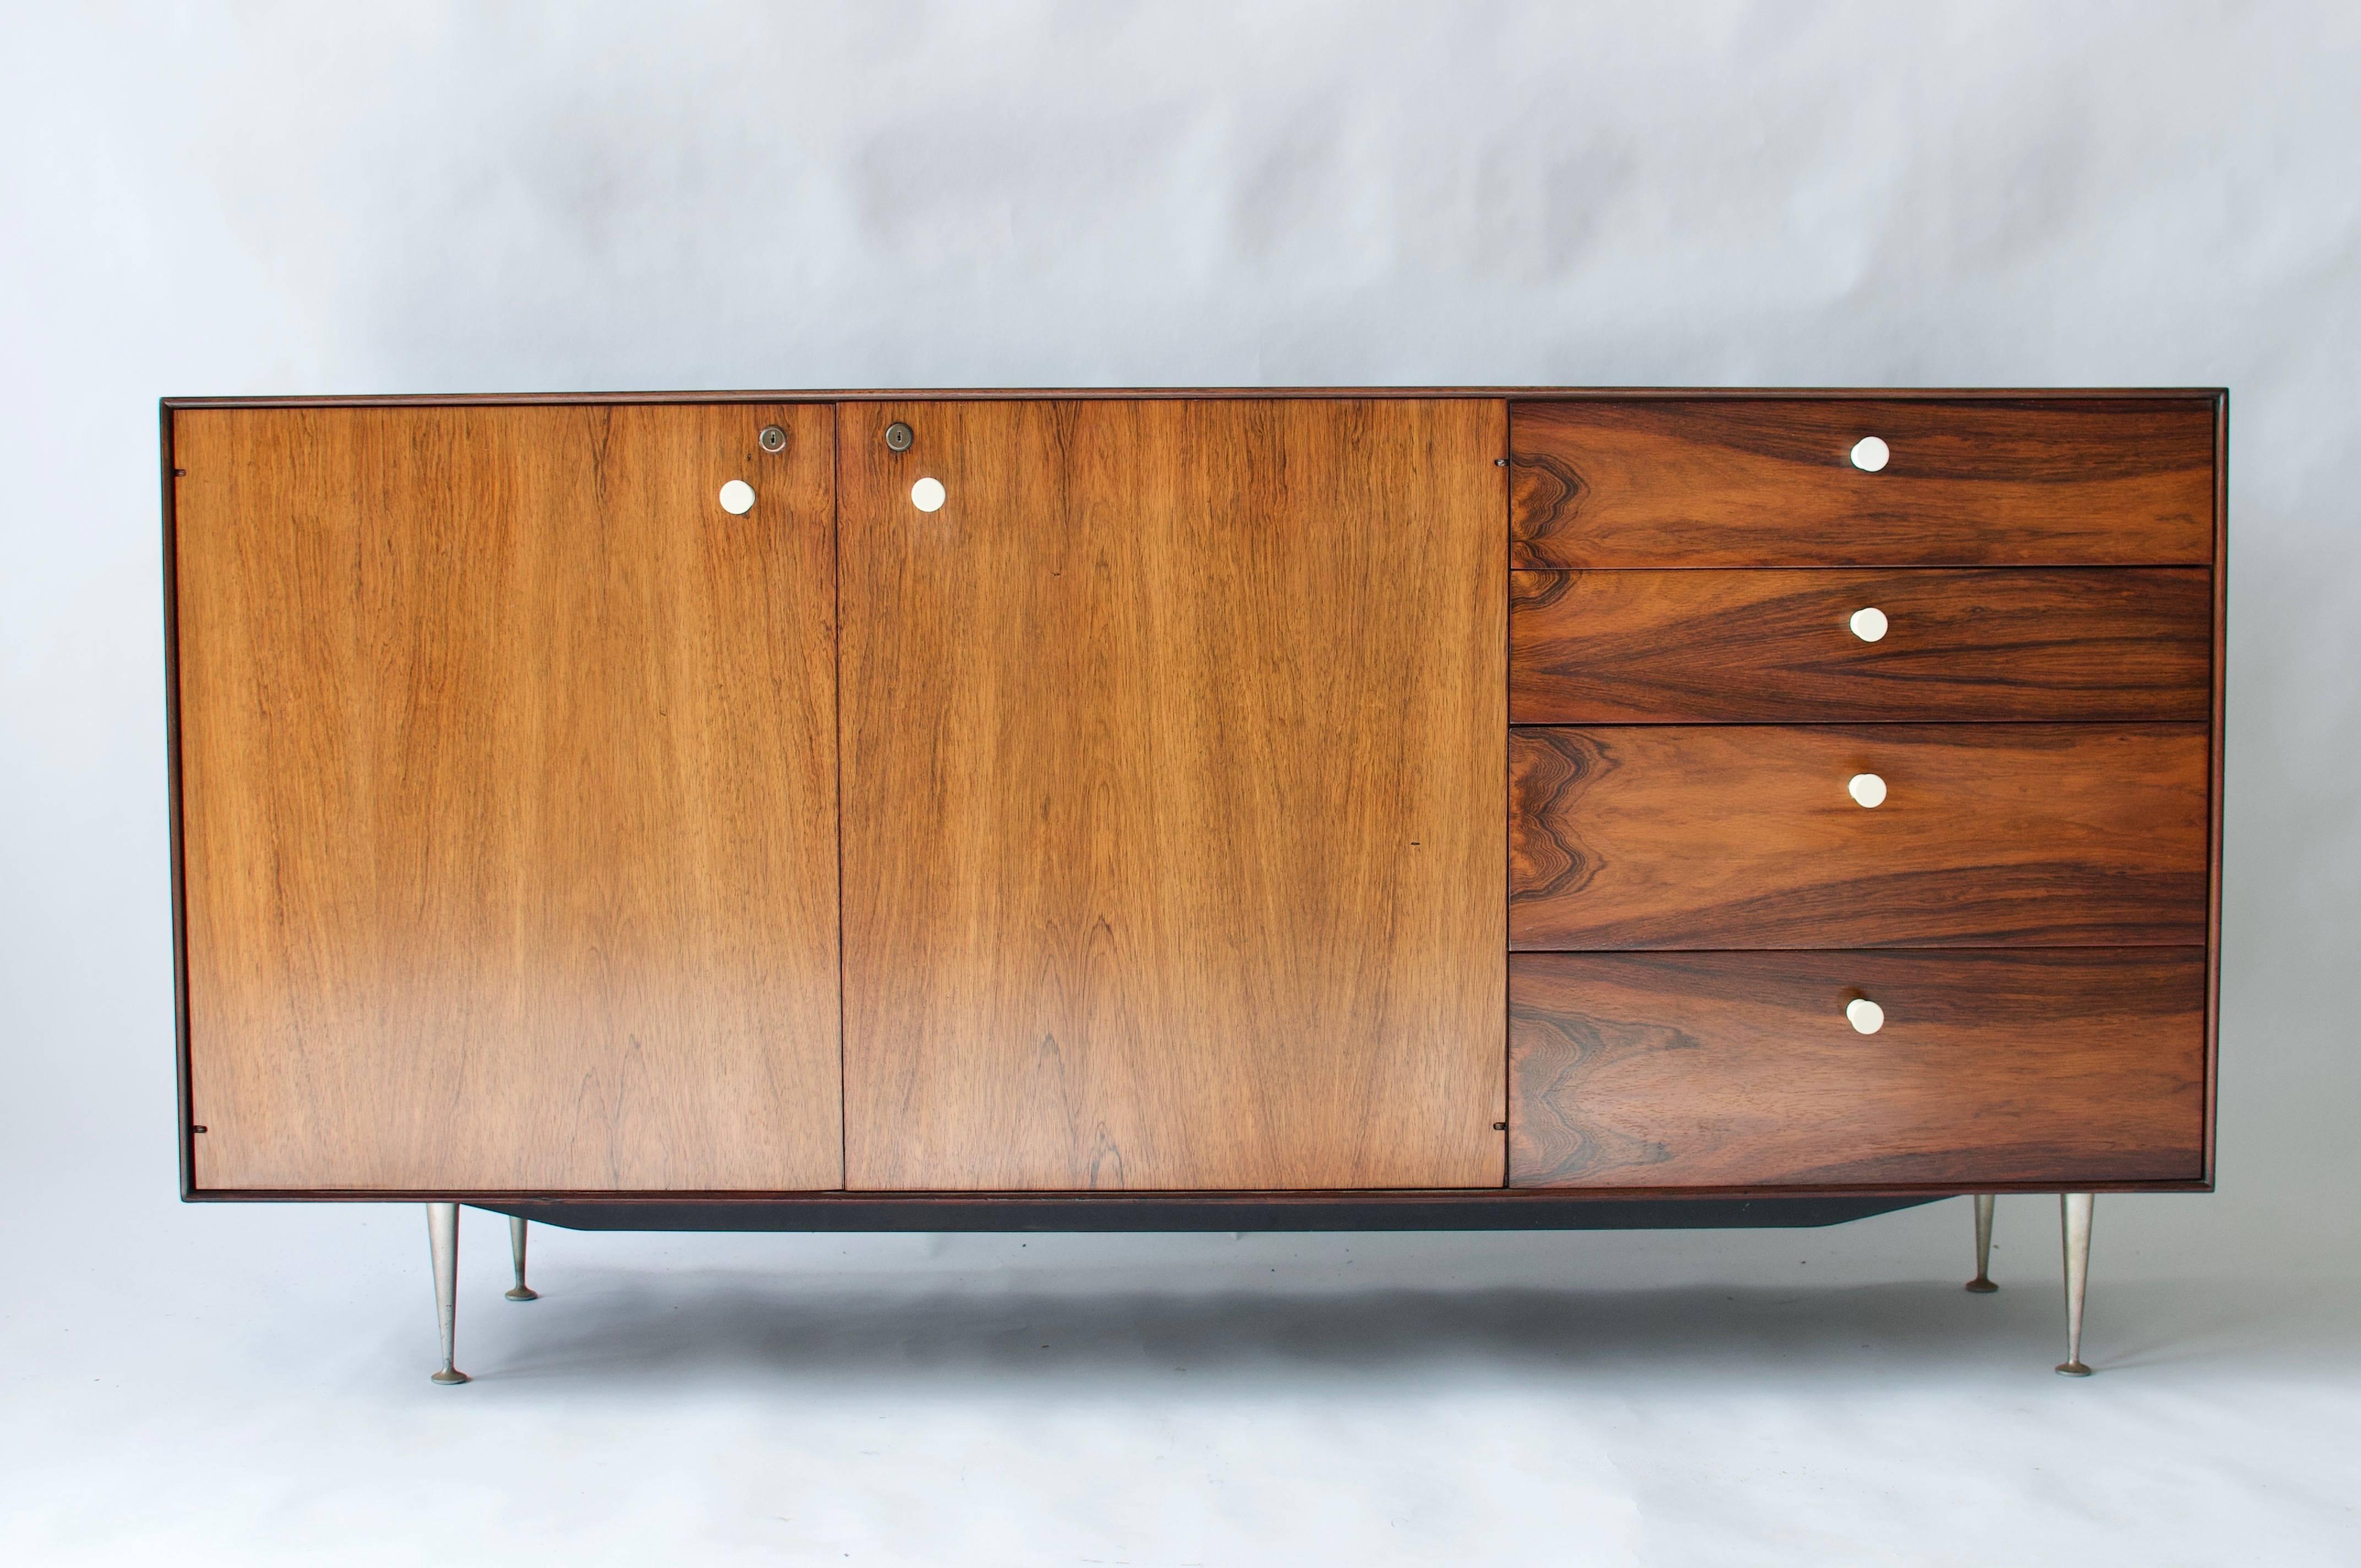 George Nelson rosewood thin edge cabinet for Herman Miller. Four drawers and two doors. Cast aluminium legs.